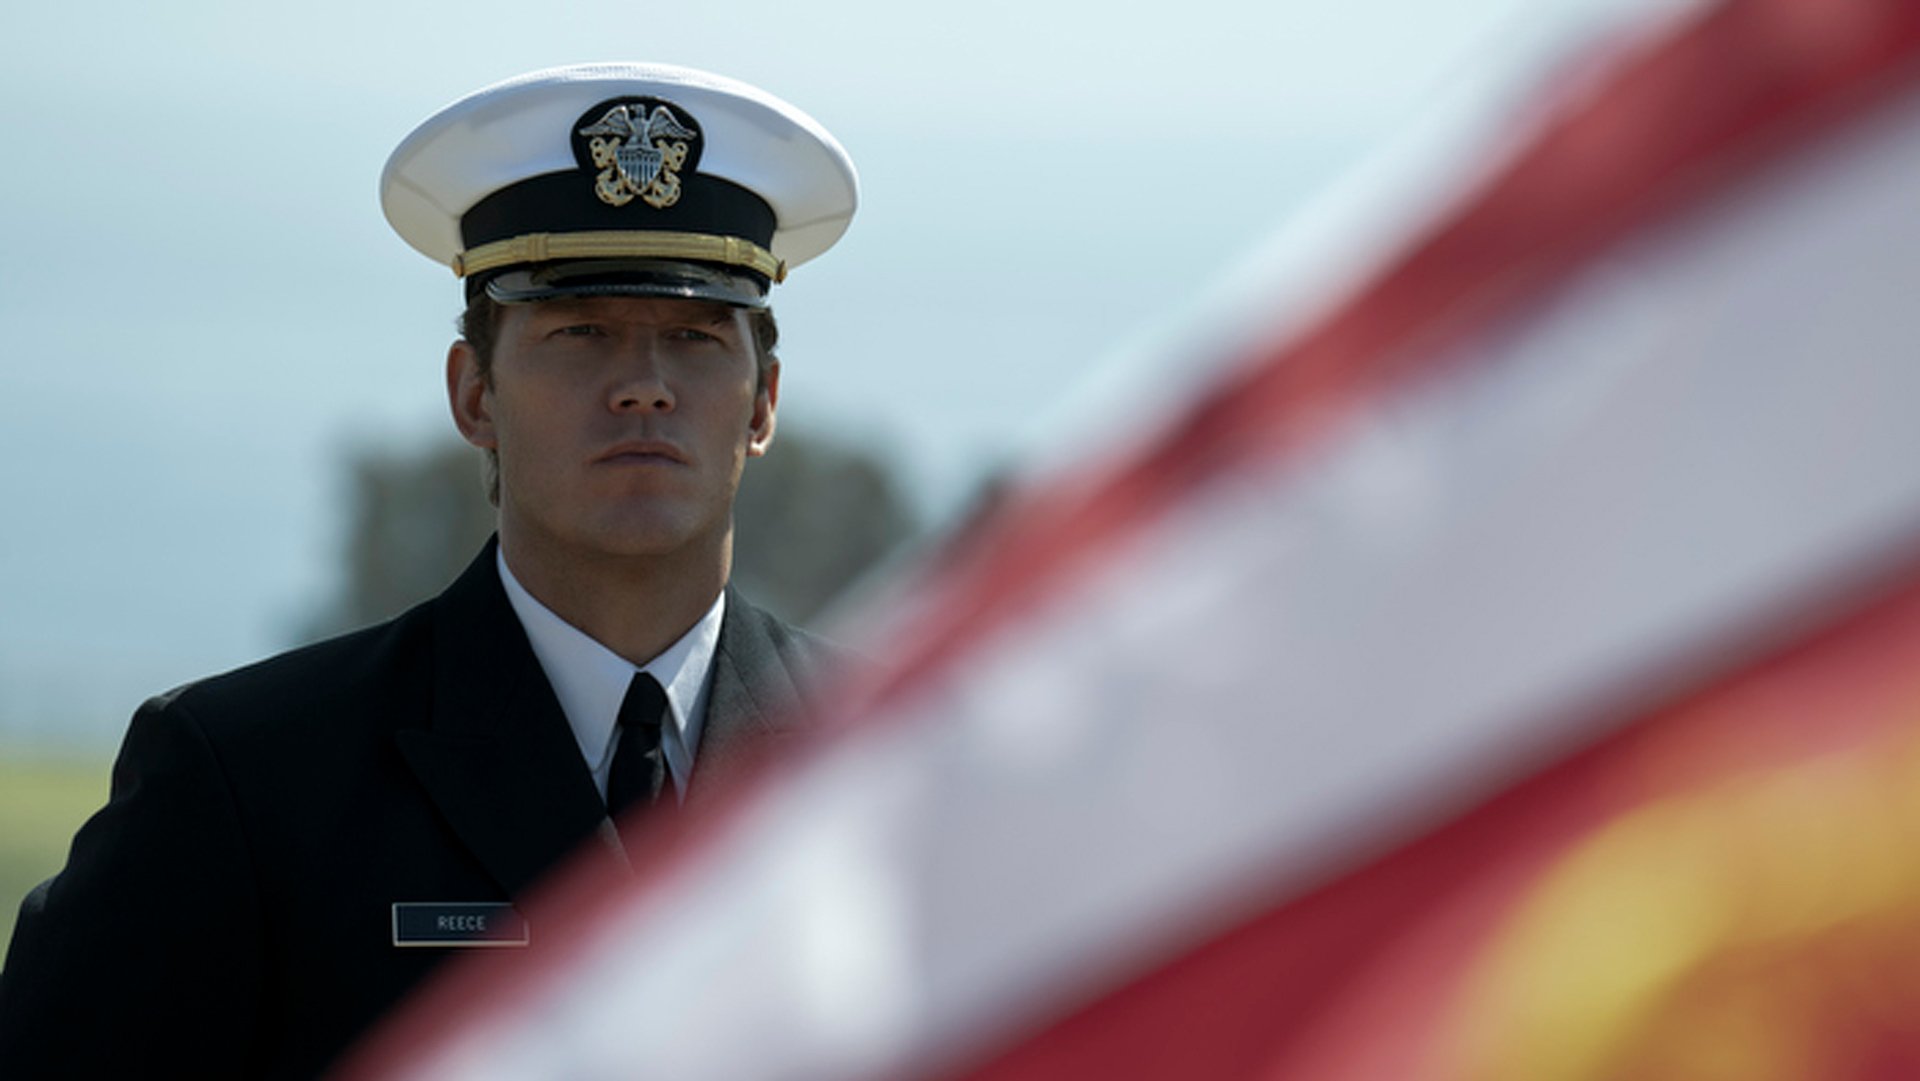 A man in military uniform stands beside an American flag.